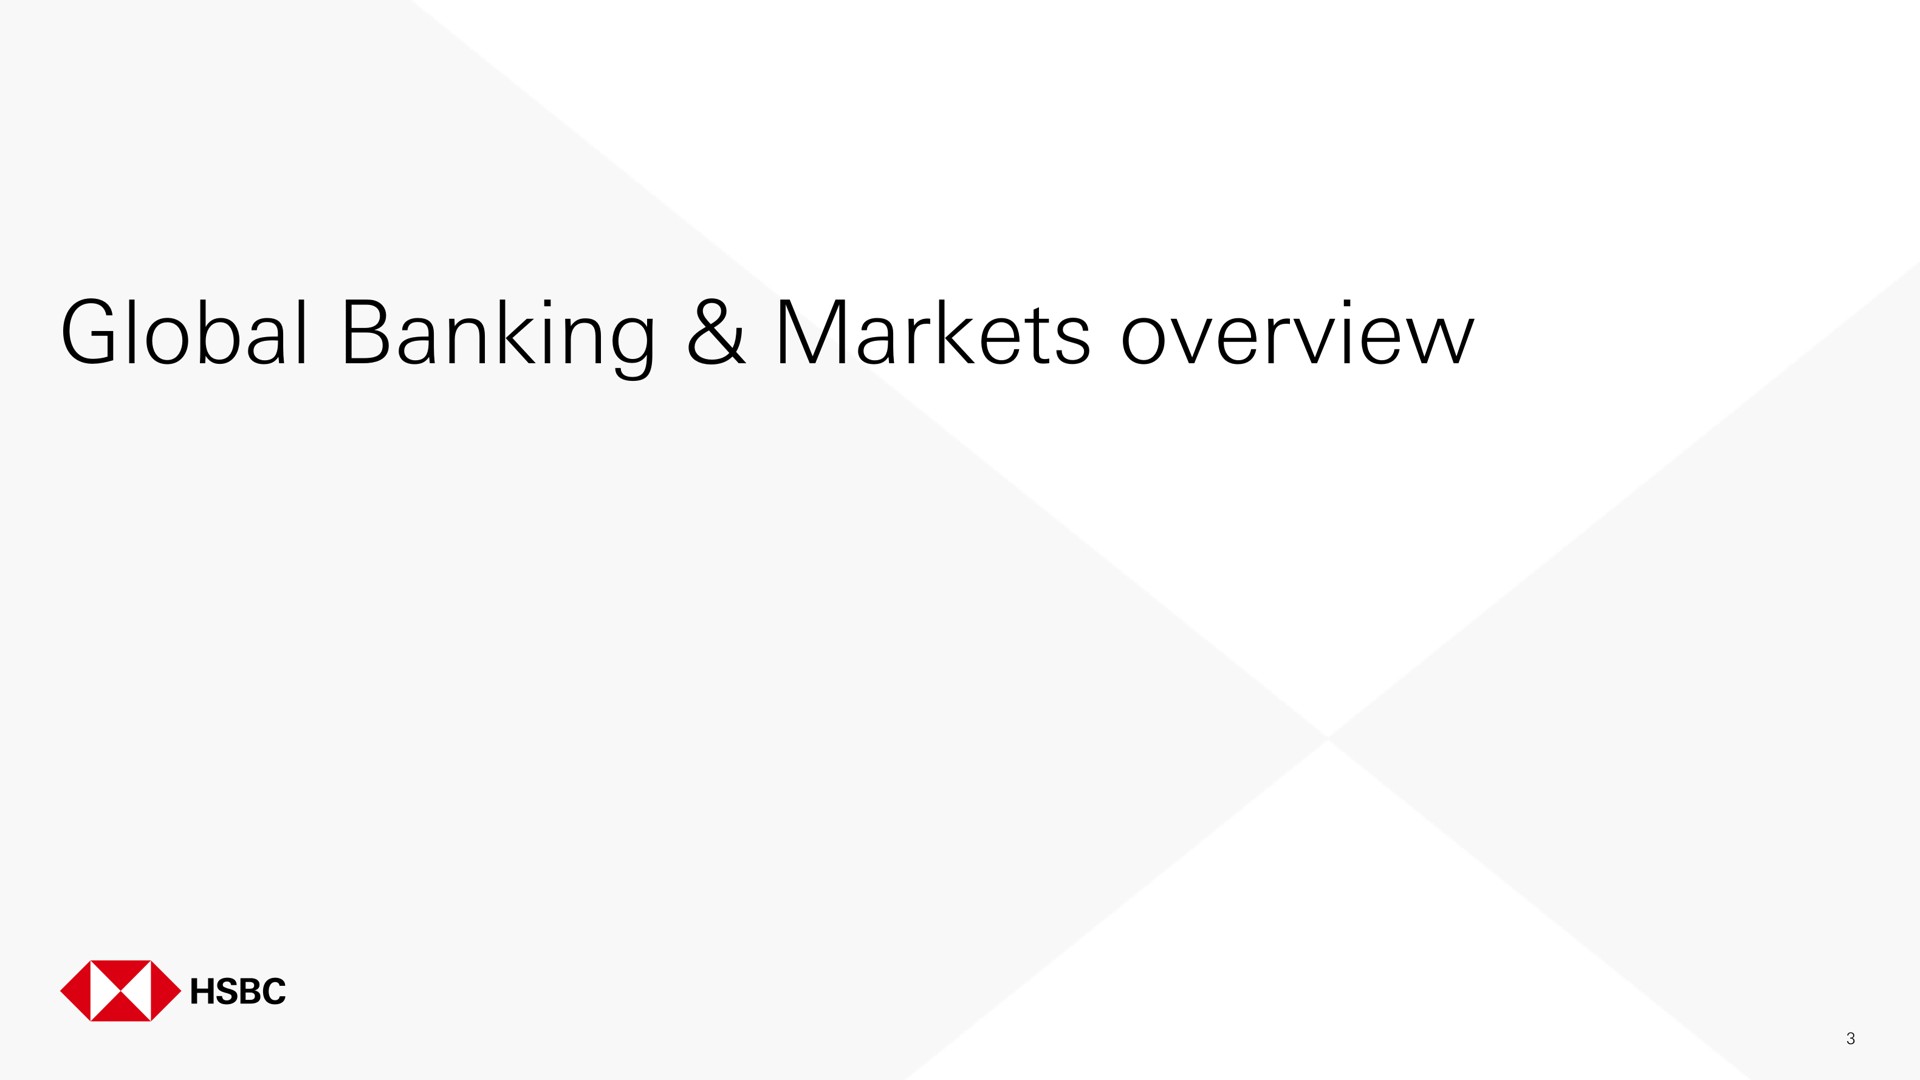 global banking markets overview | HSBC